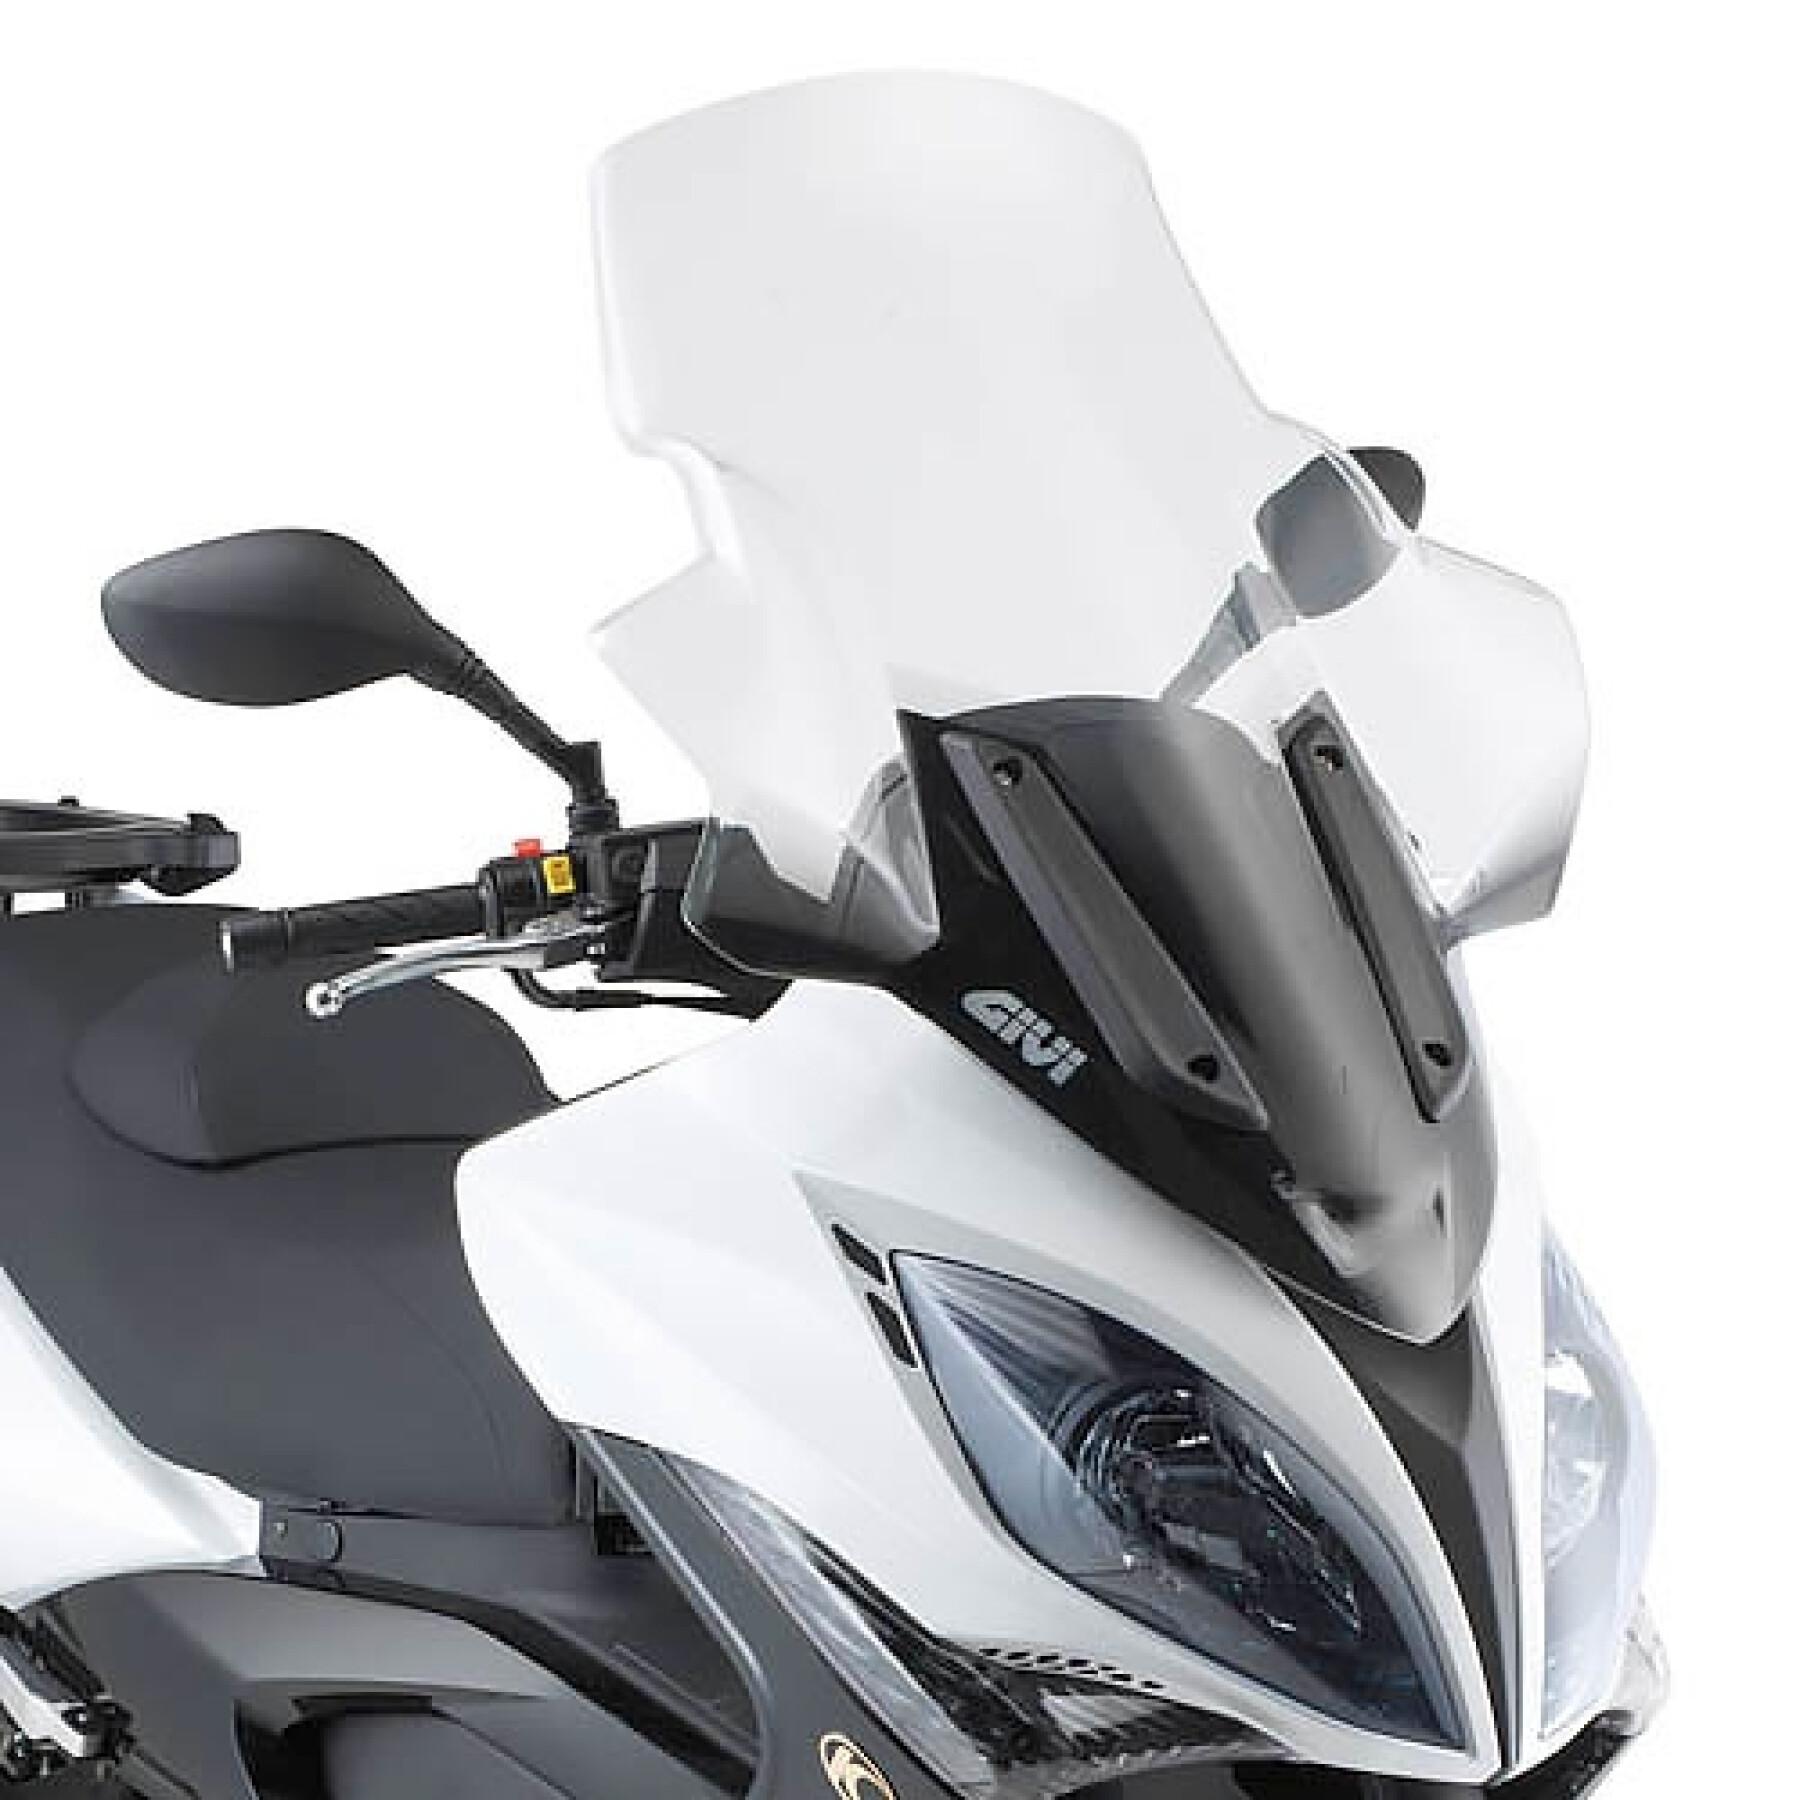 Scooter voorruit Givi Kymco xciting 300i - 500i r (2009 à 2014)